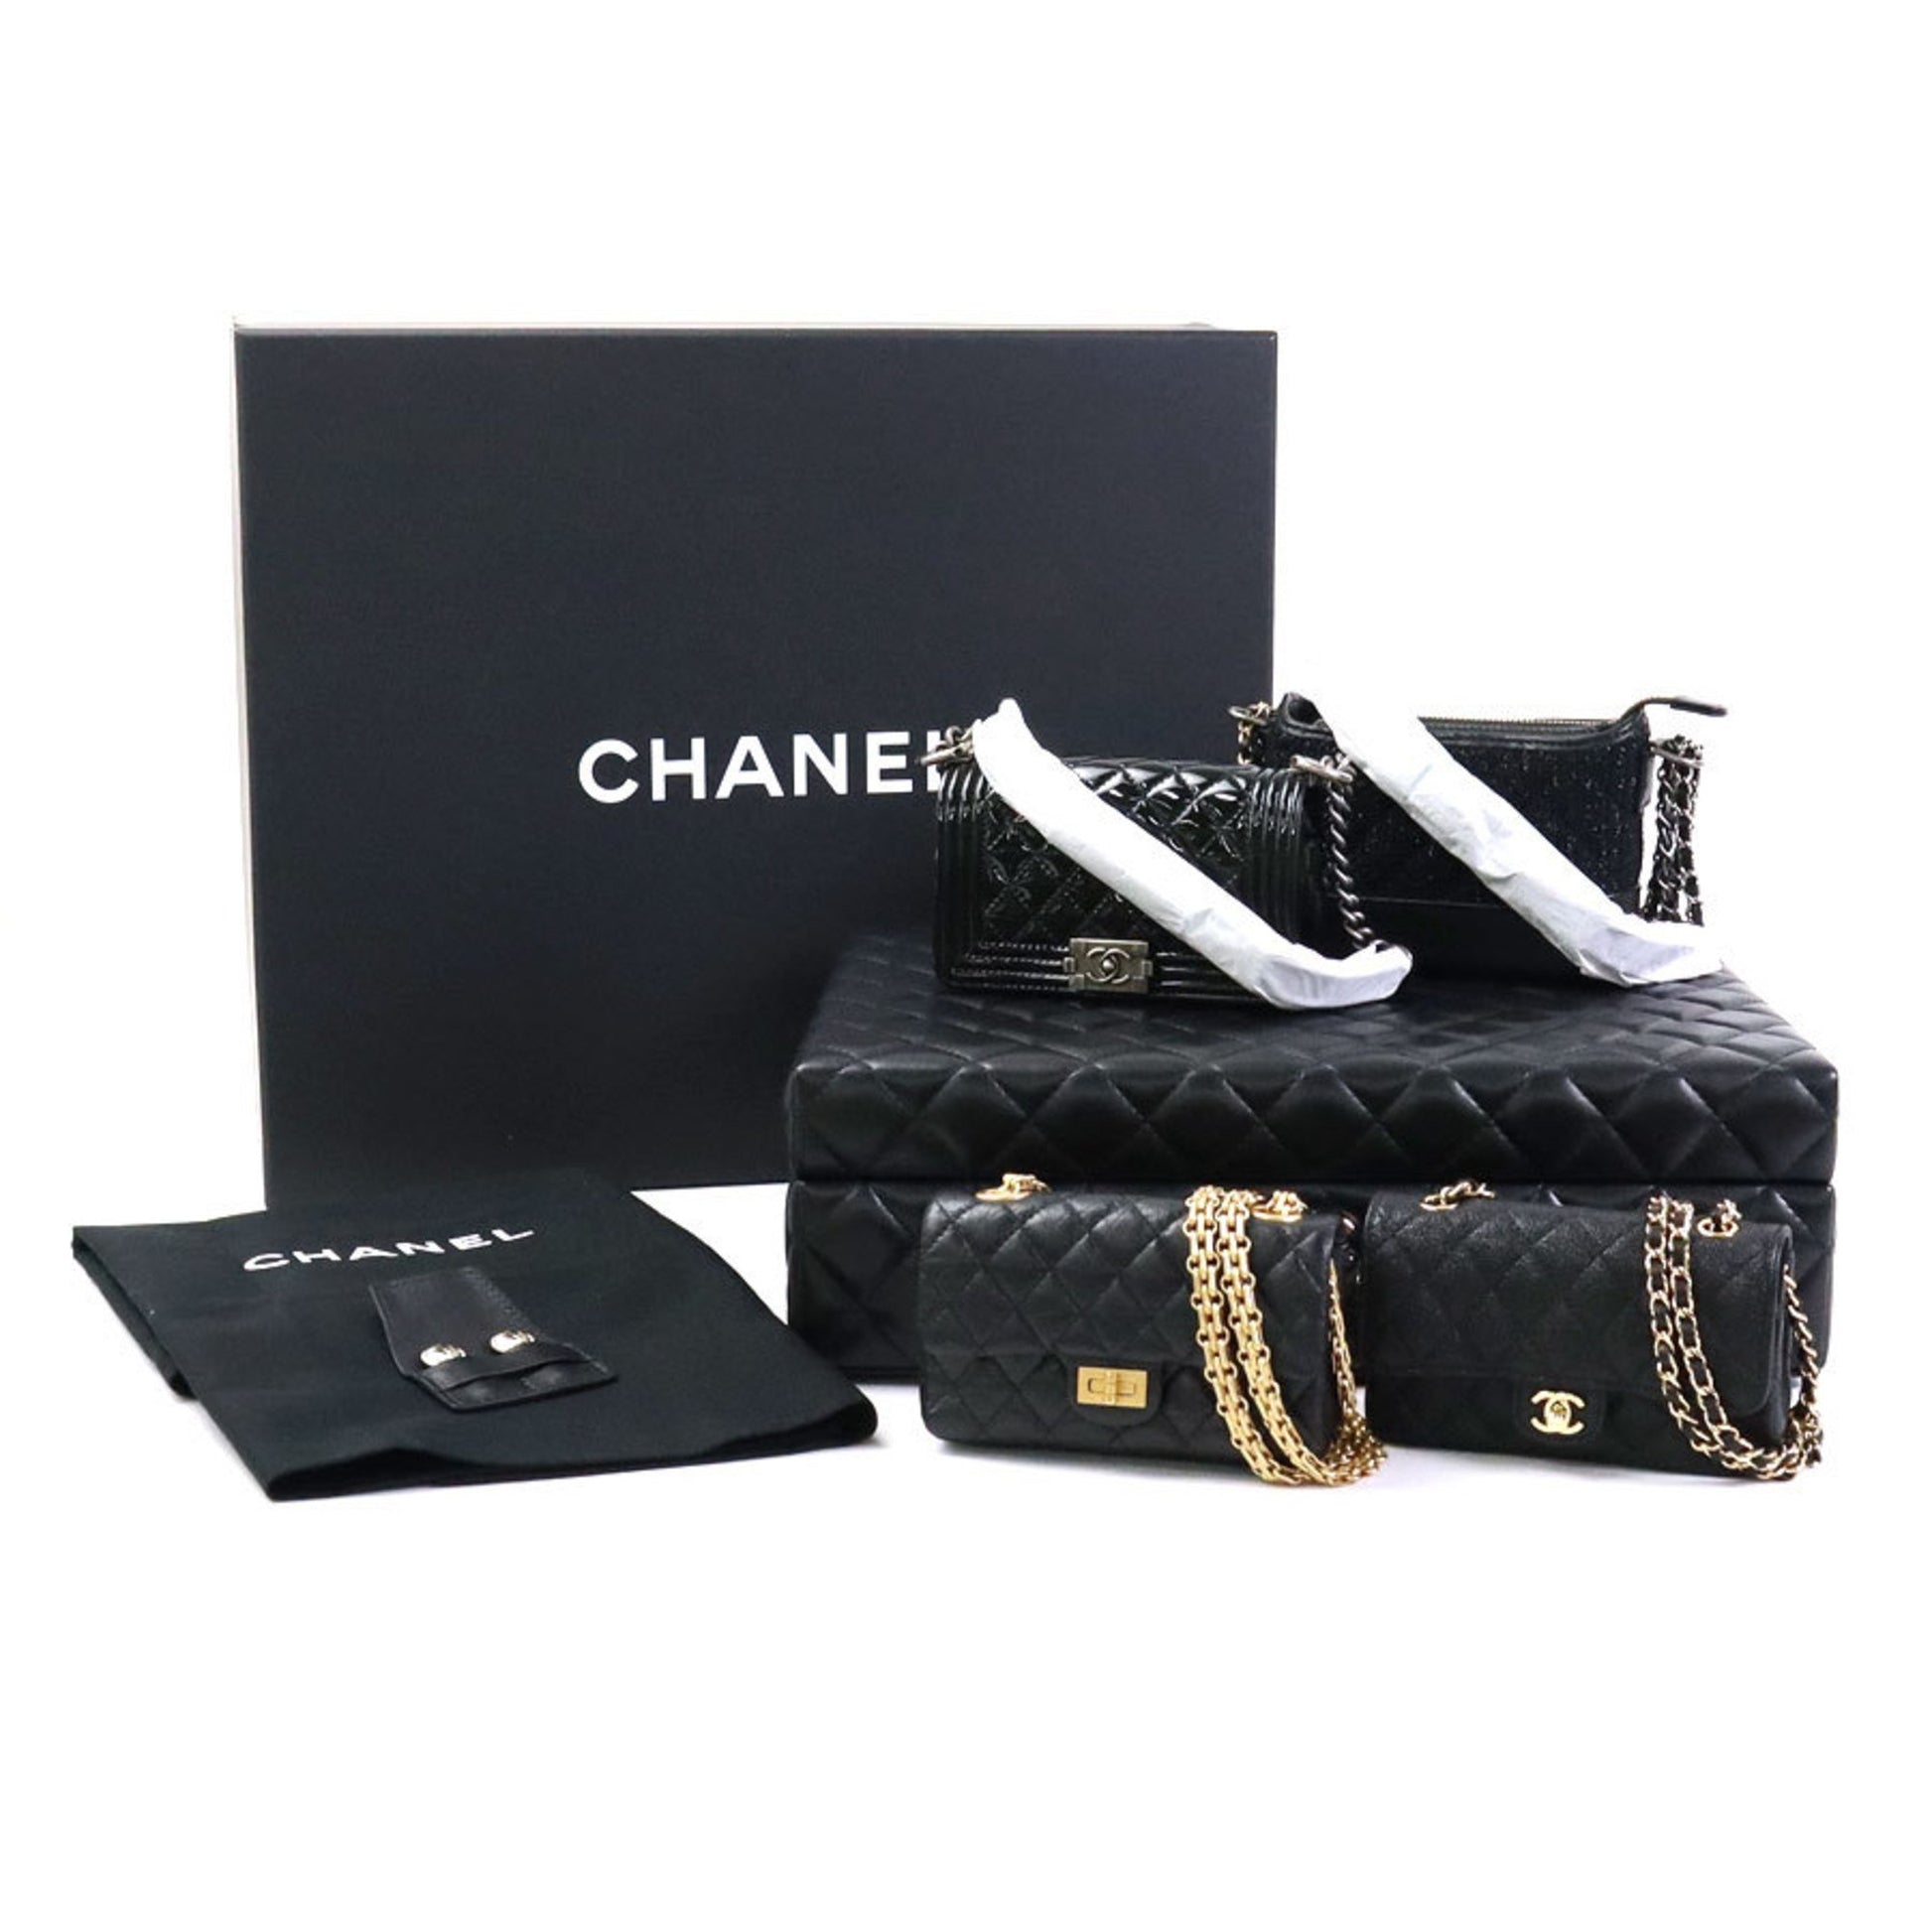 Chanel Success Story Set Of 4 Mini Bags With Quilted Trunk Limited